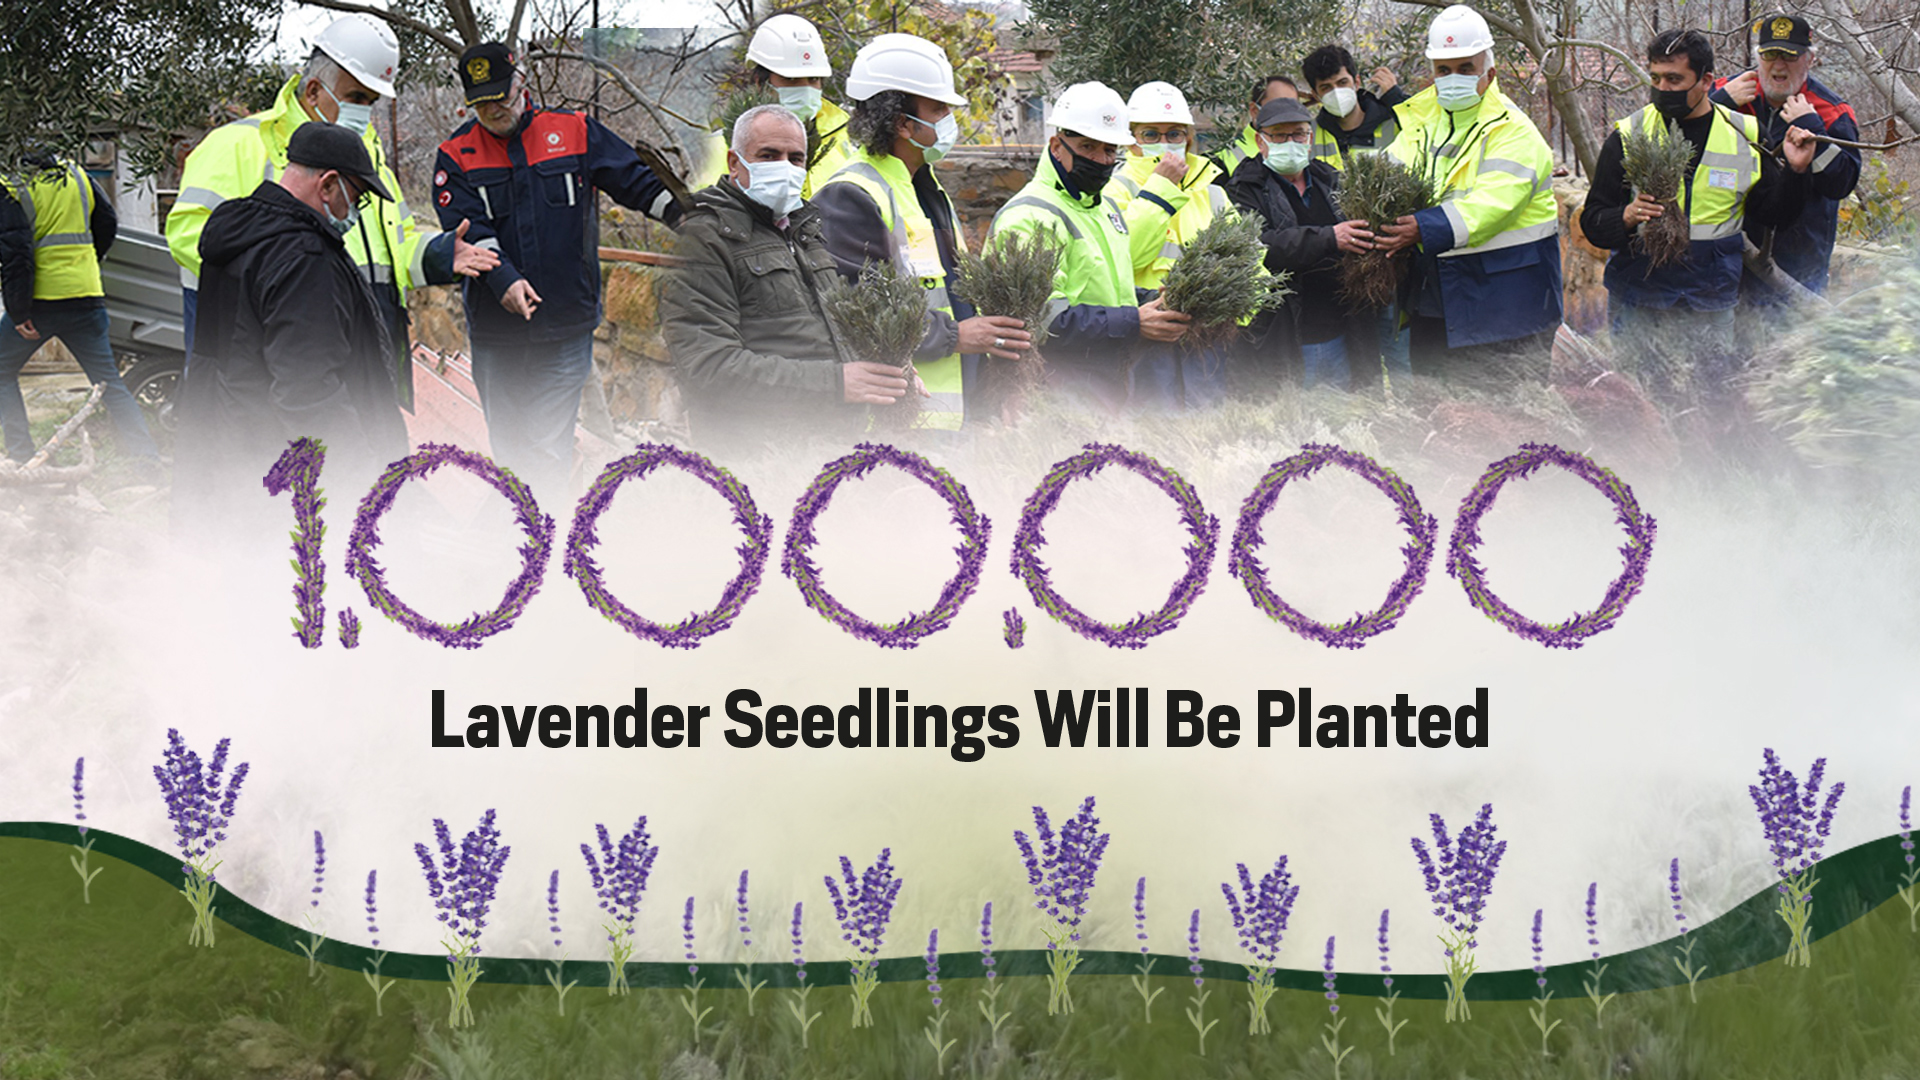 1,000,000 Lavender Seedlings Will Be Planted